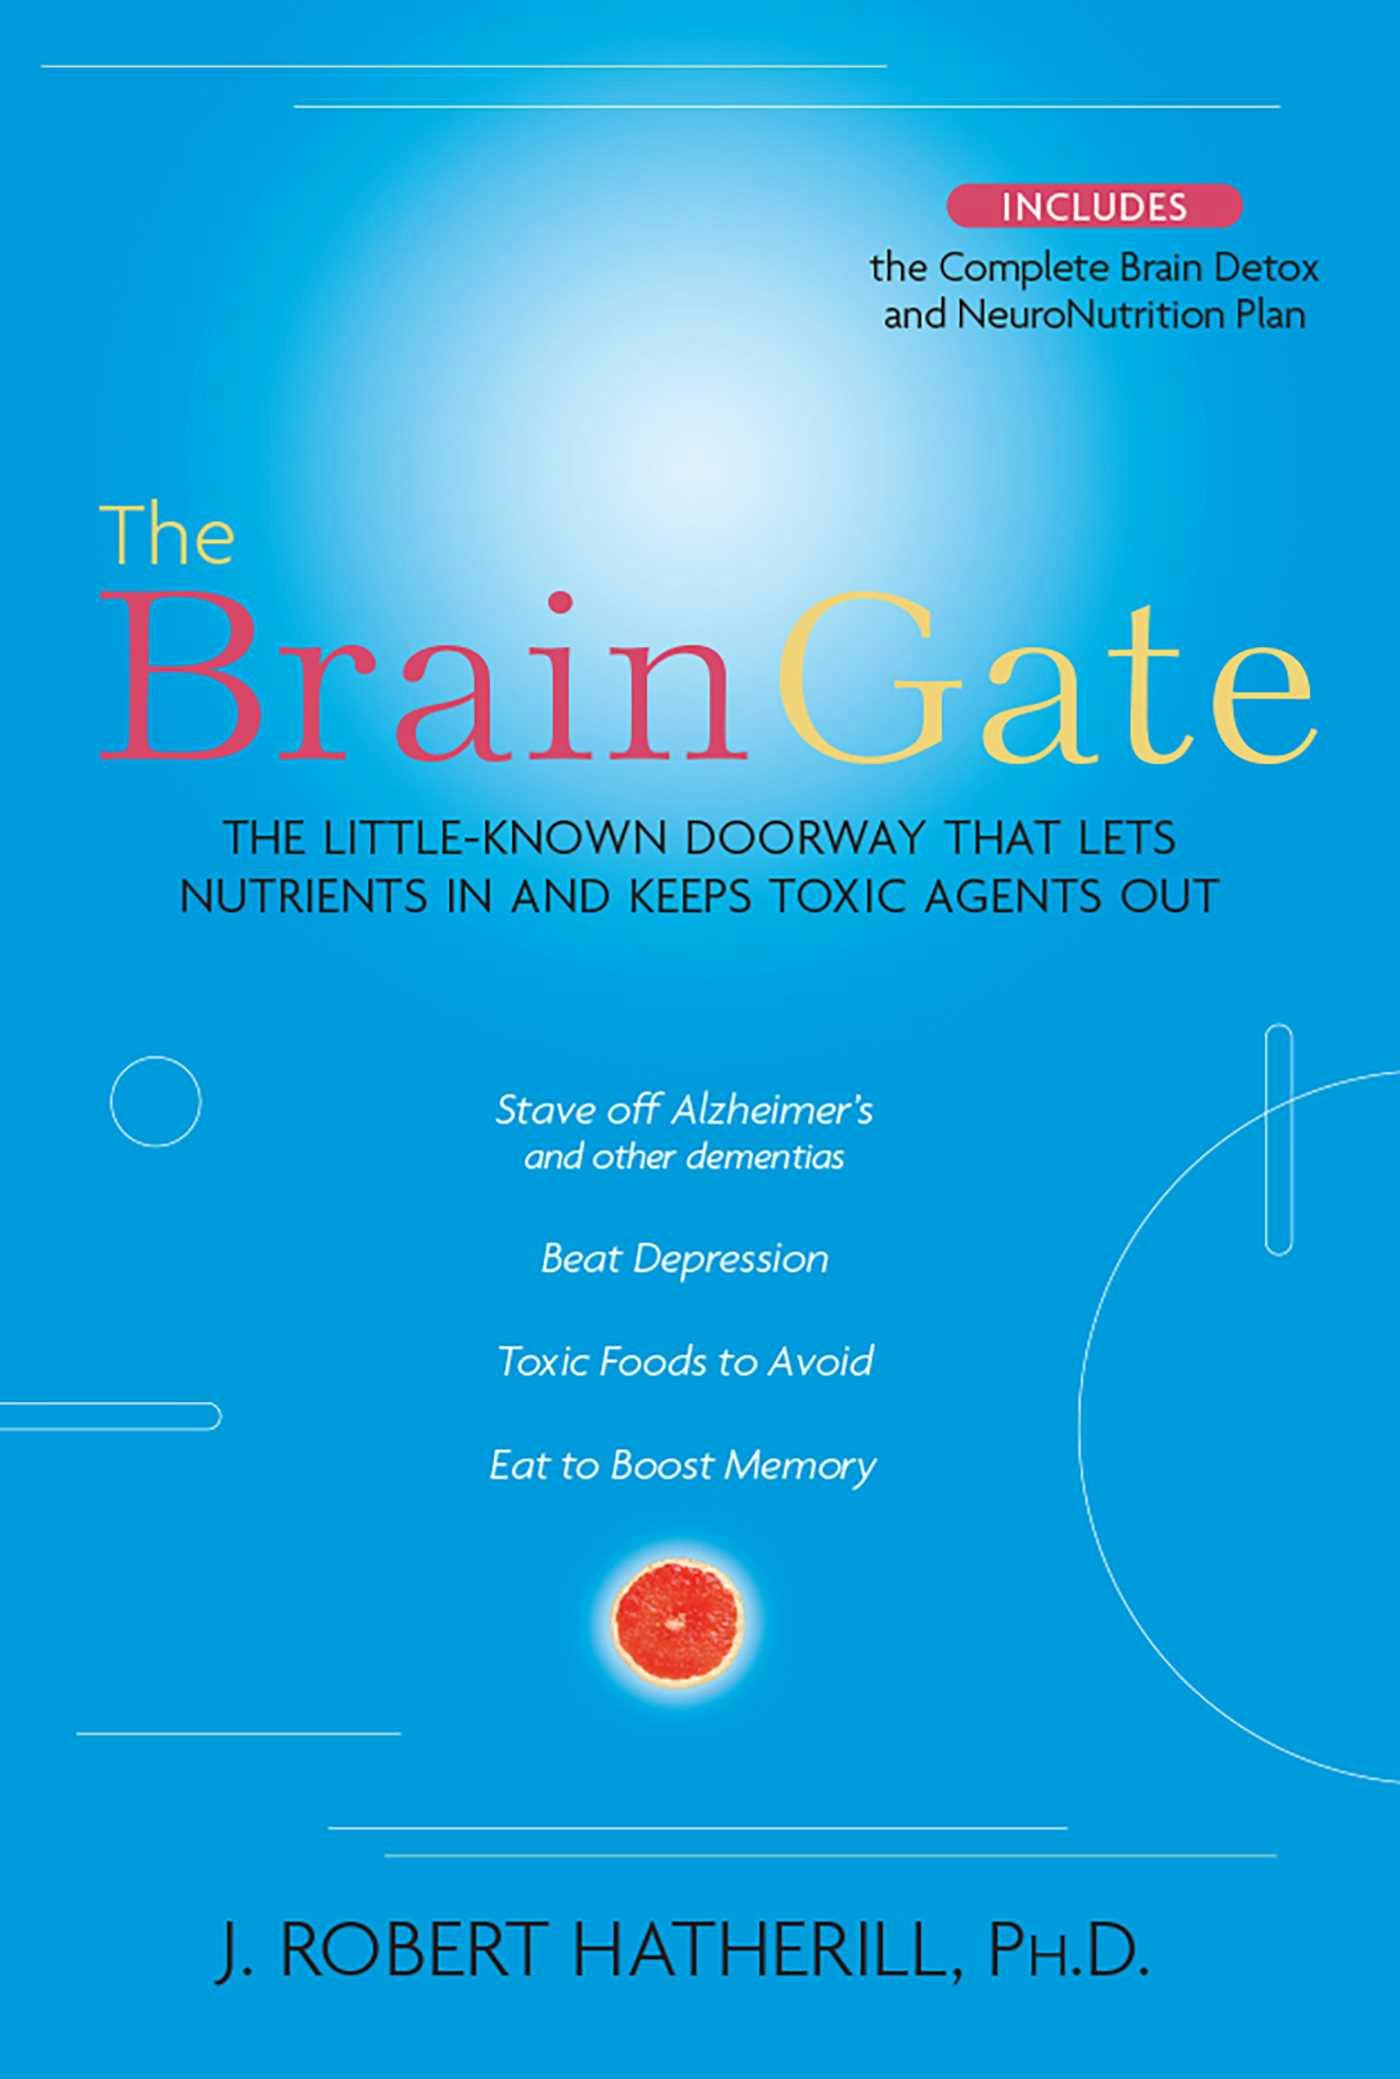 The Brain Gate: The Little-Known Doorway That Lets Nutrients in and Keeps Toxic Agents Out - J. Robert Hatherill